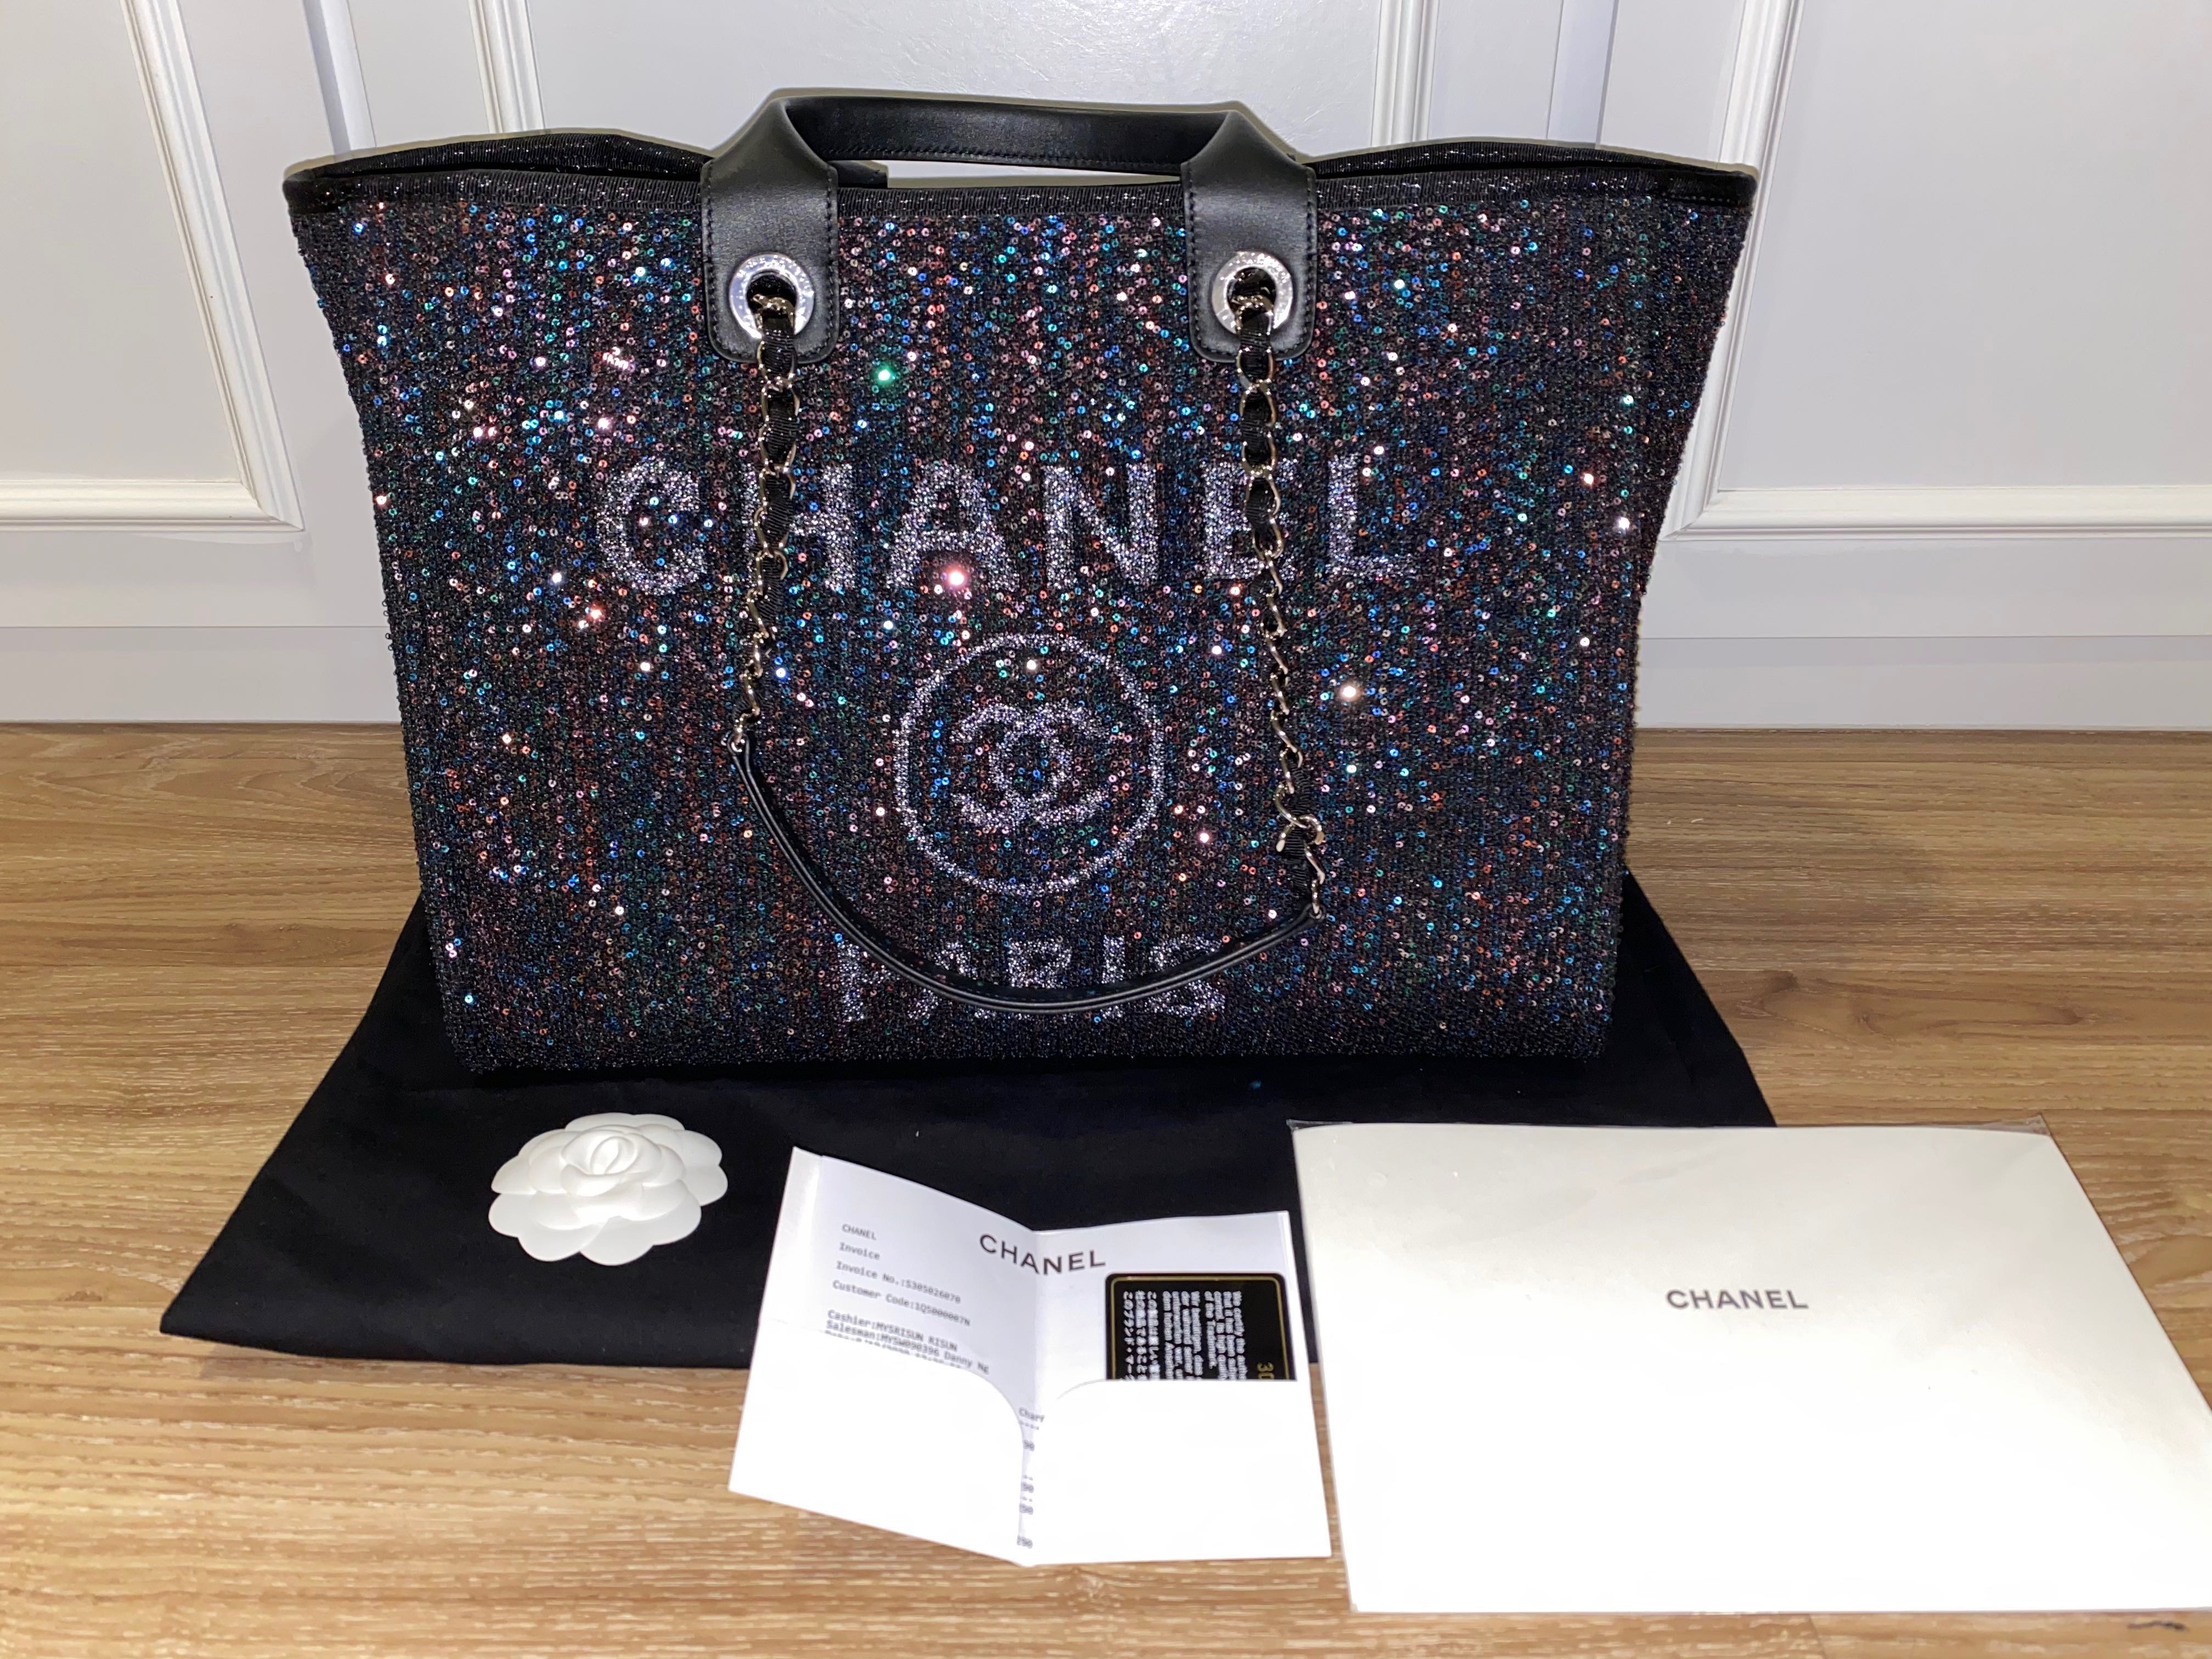 Chanel Deauville Large Tote Bag BNIB (Selling below retail price)